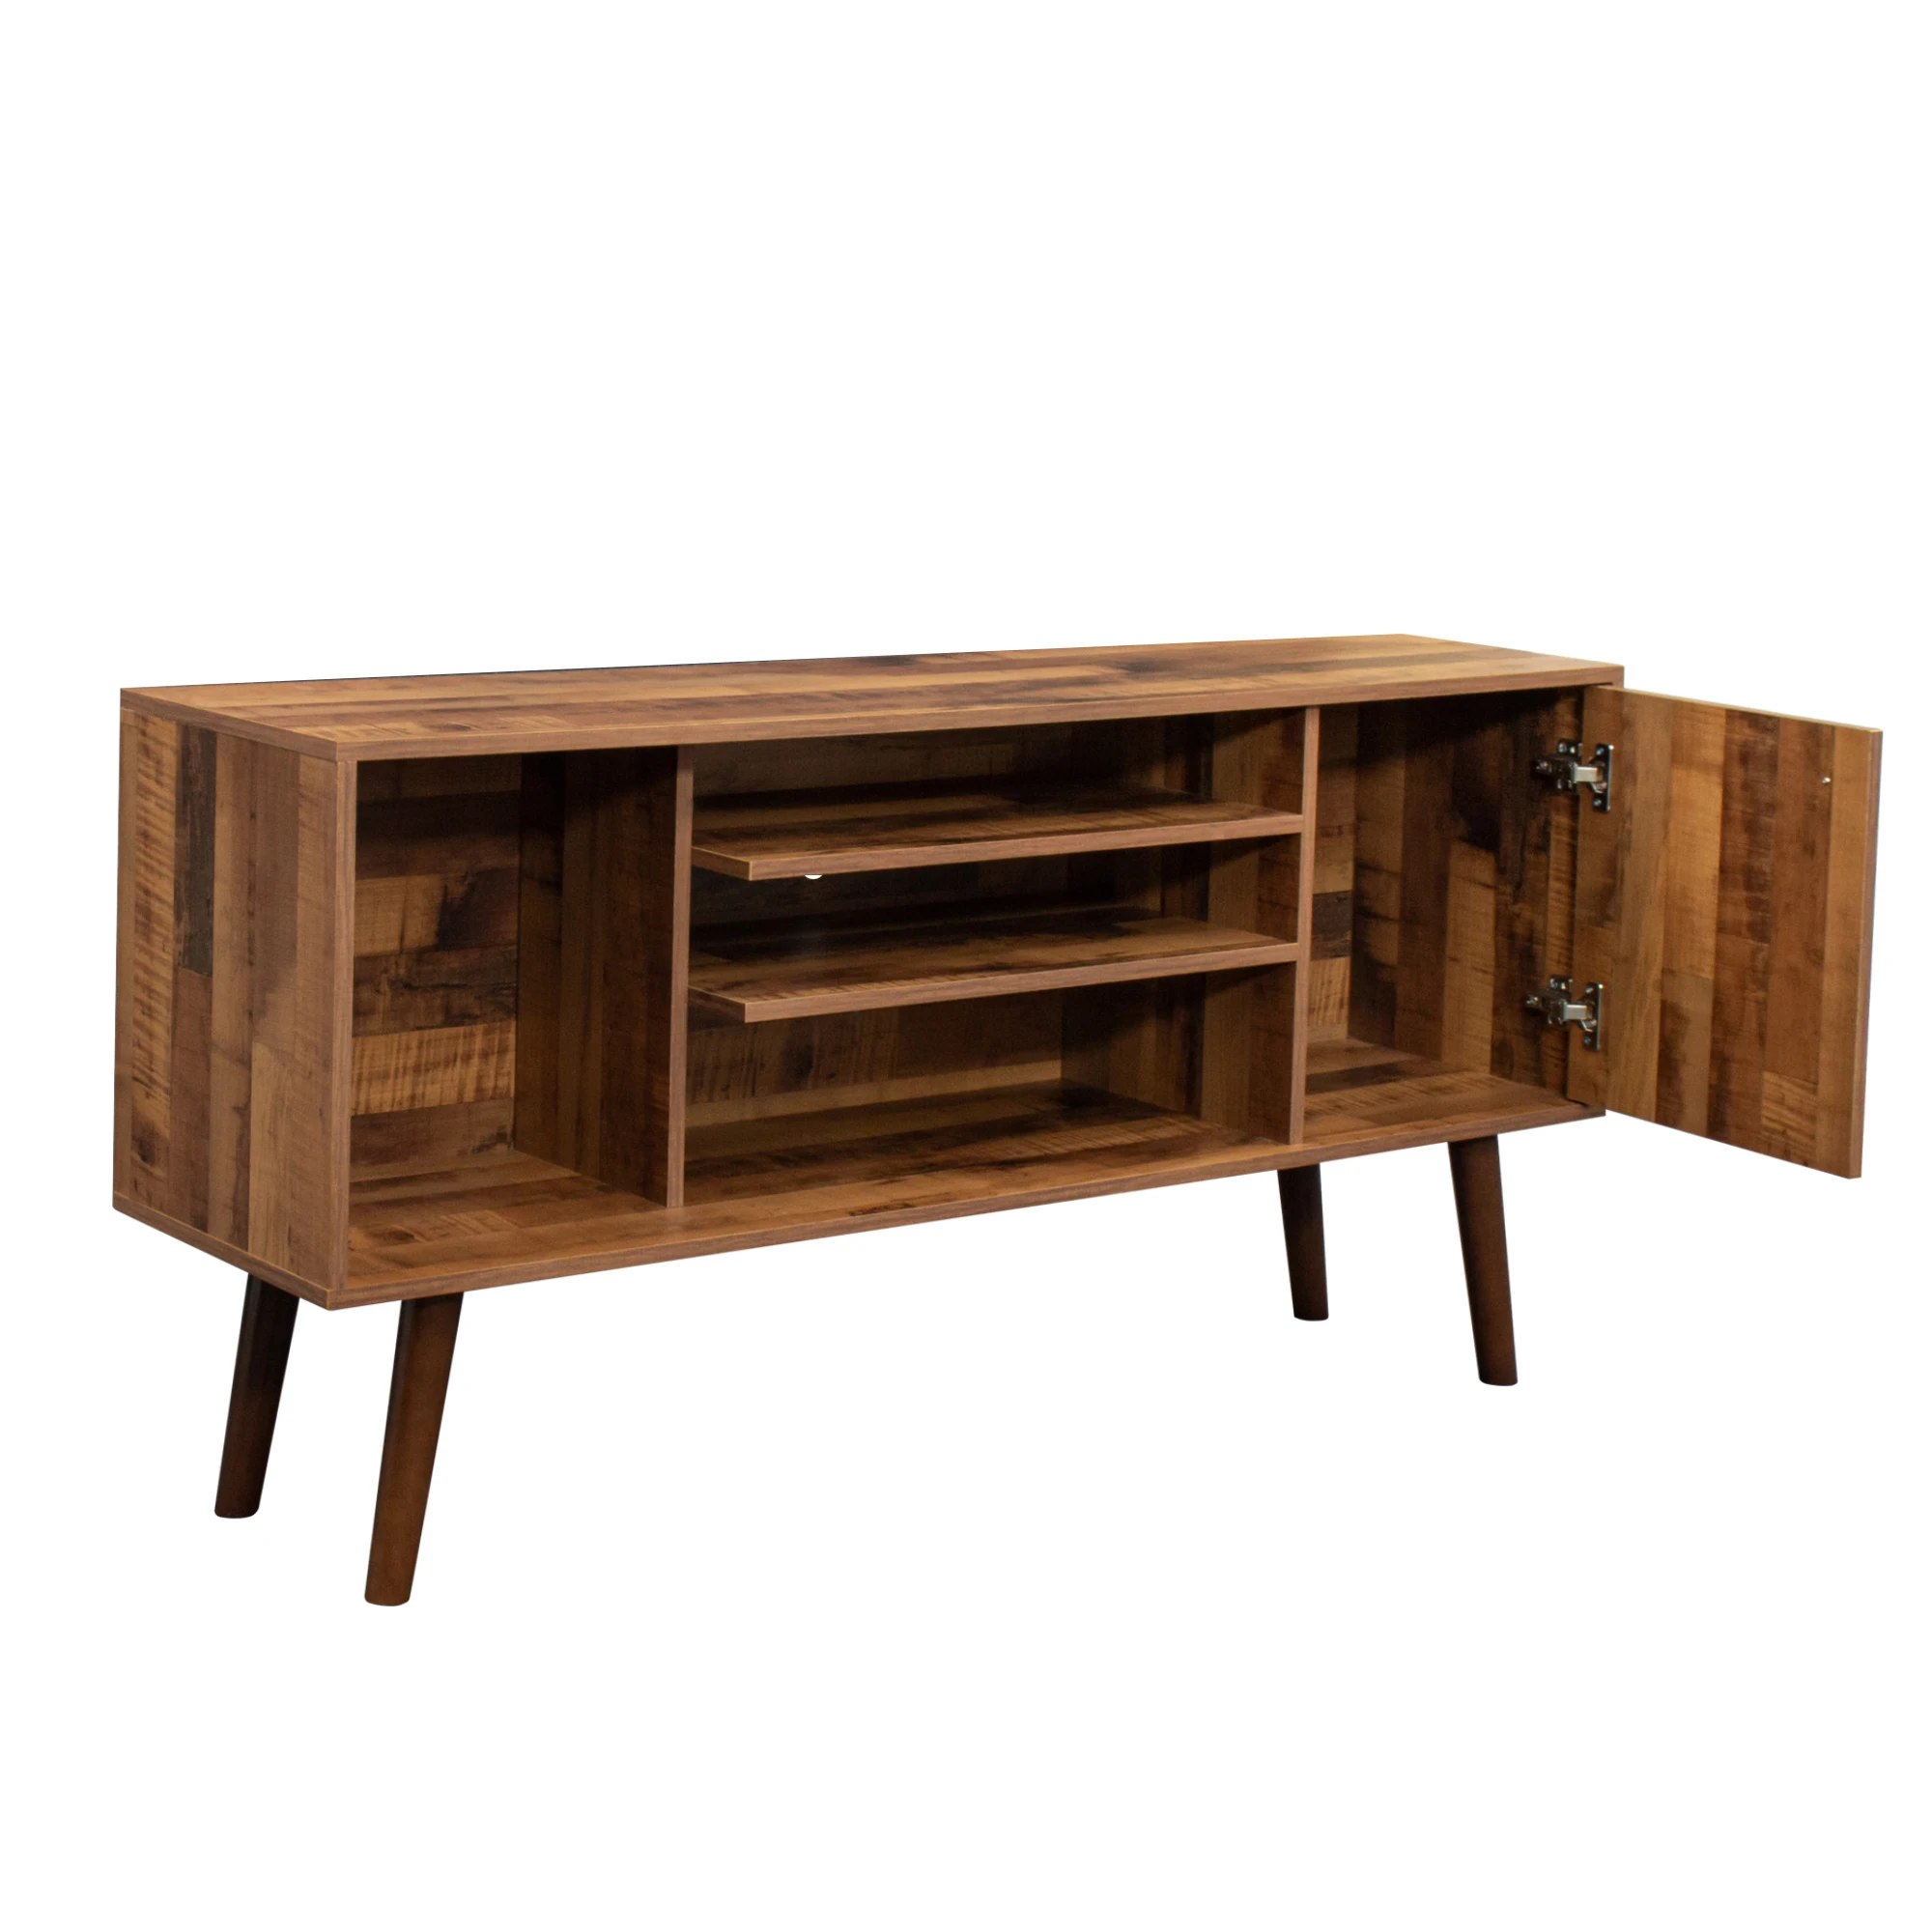 Solid Wood Cabinet With Legs